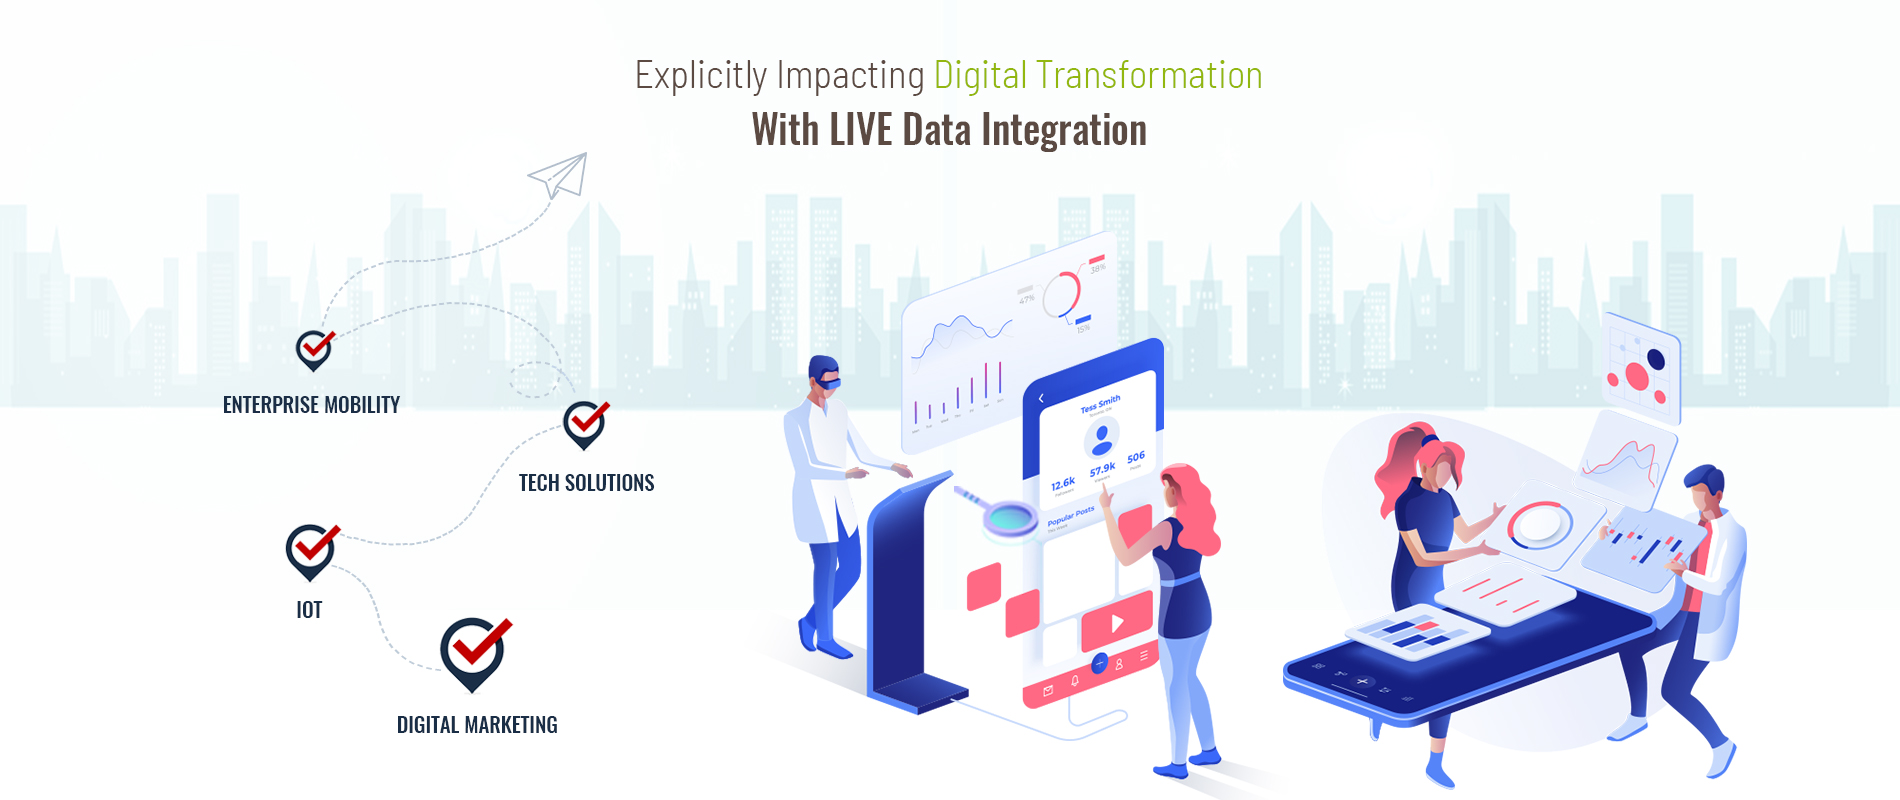 Explicitly impacting your Digital Transformation story with LIVE Data Integration | MaxMobility